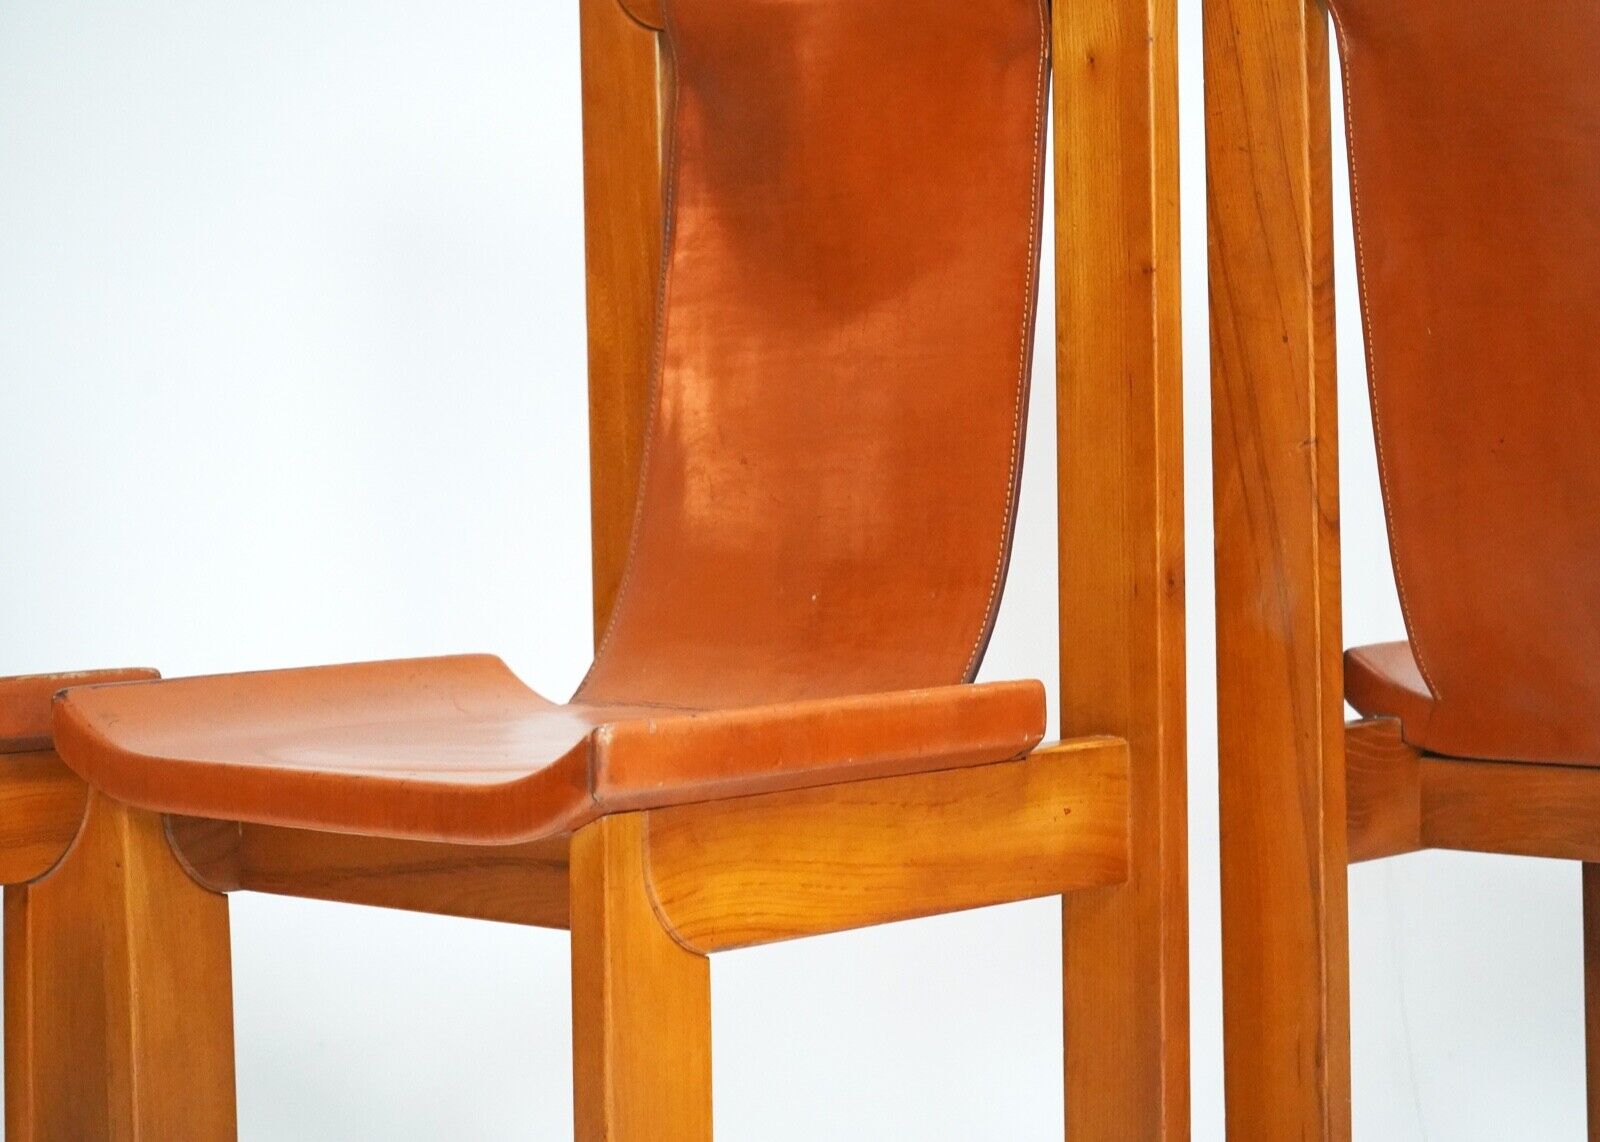 EXCLUSIVELY AT SELFRIDGES - 4 Roland Haeusler Leather Dining Chairs